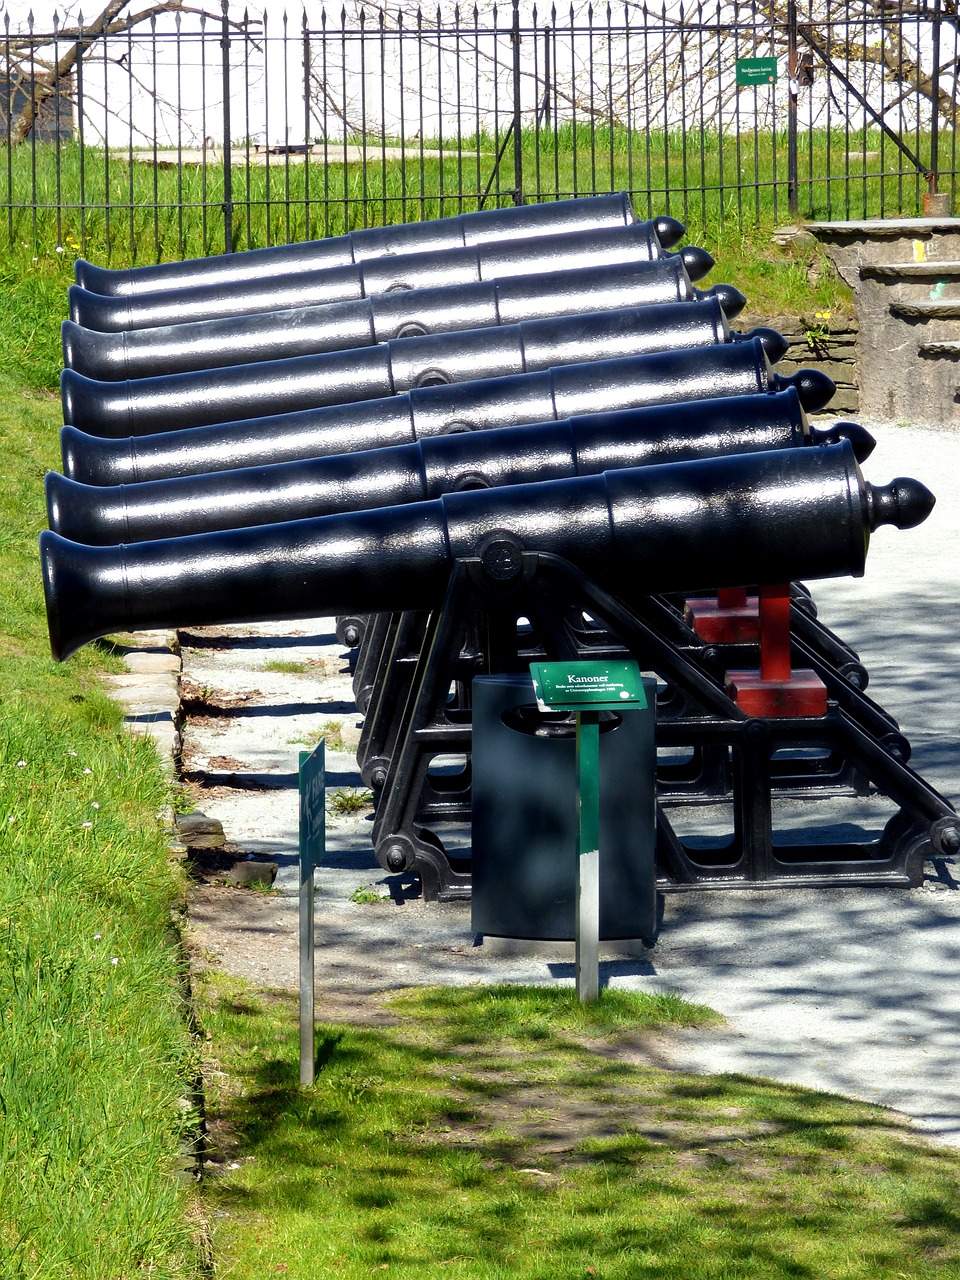 cannons black old free photo